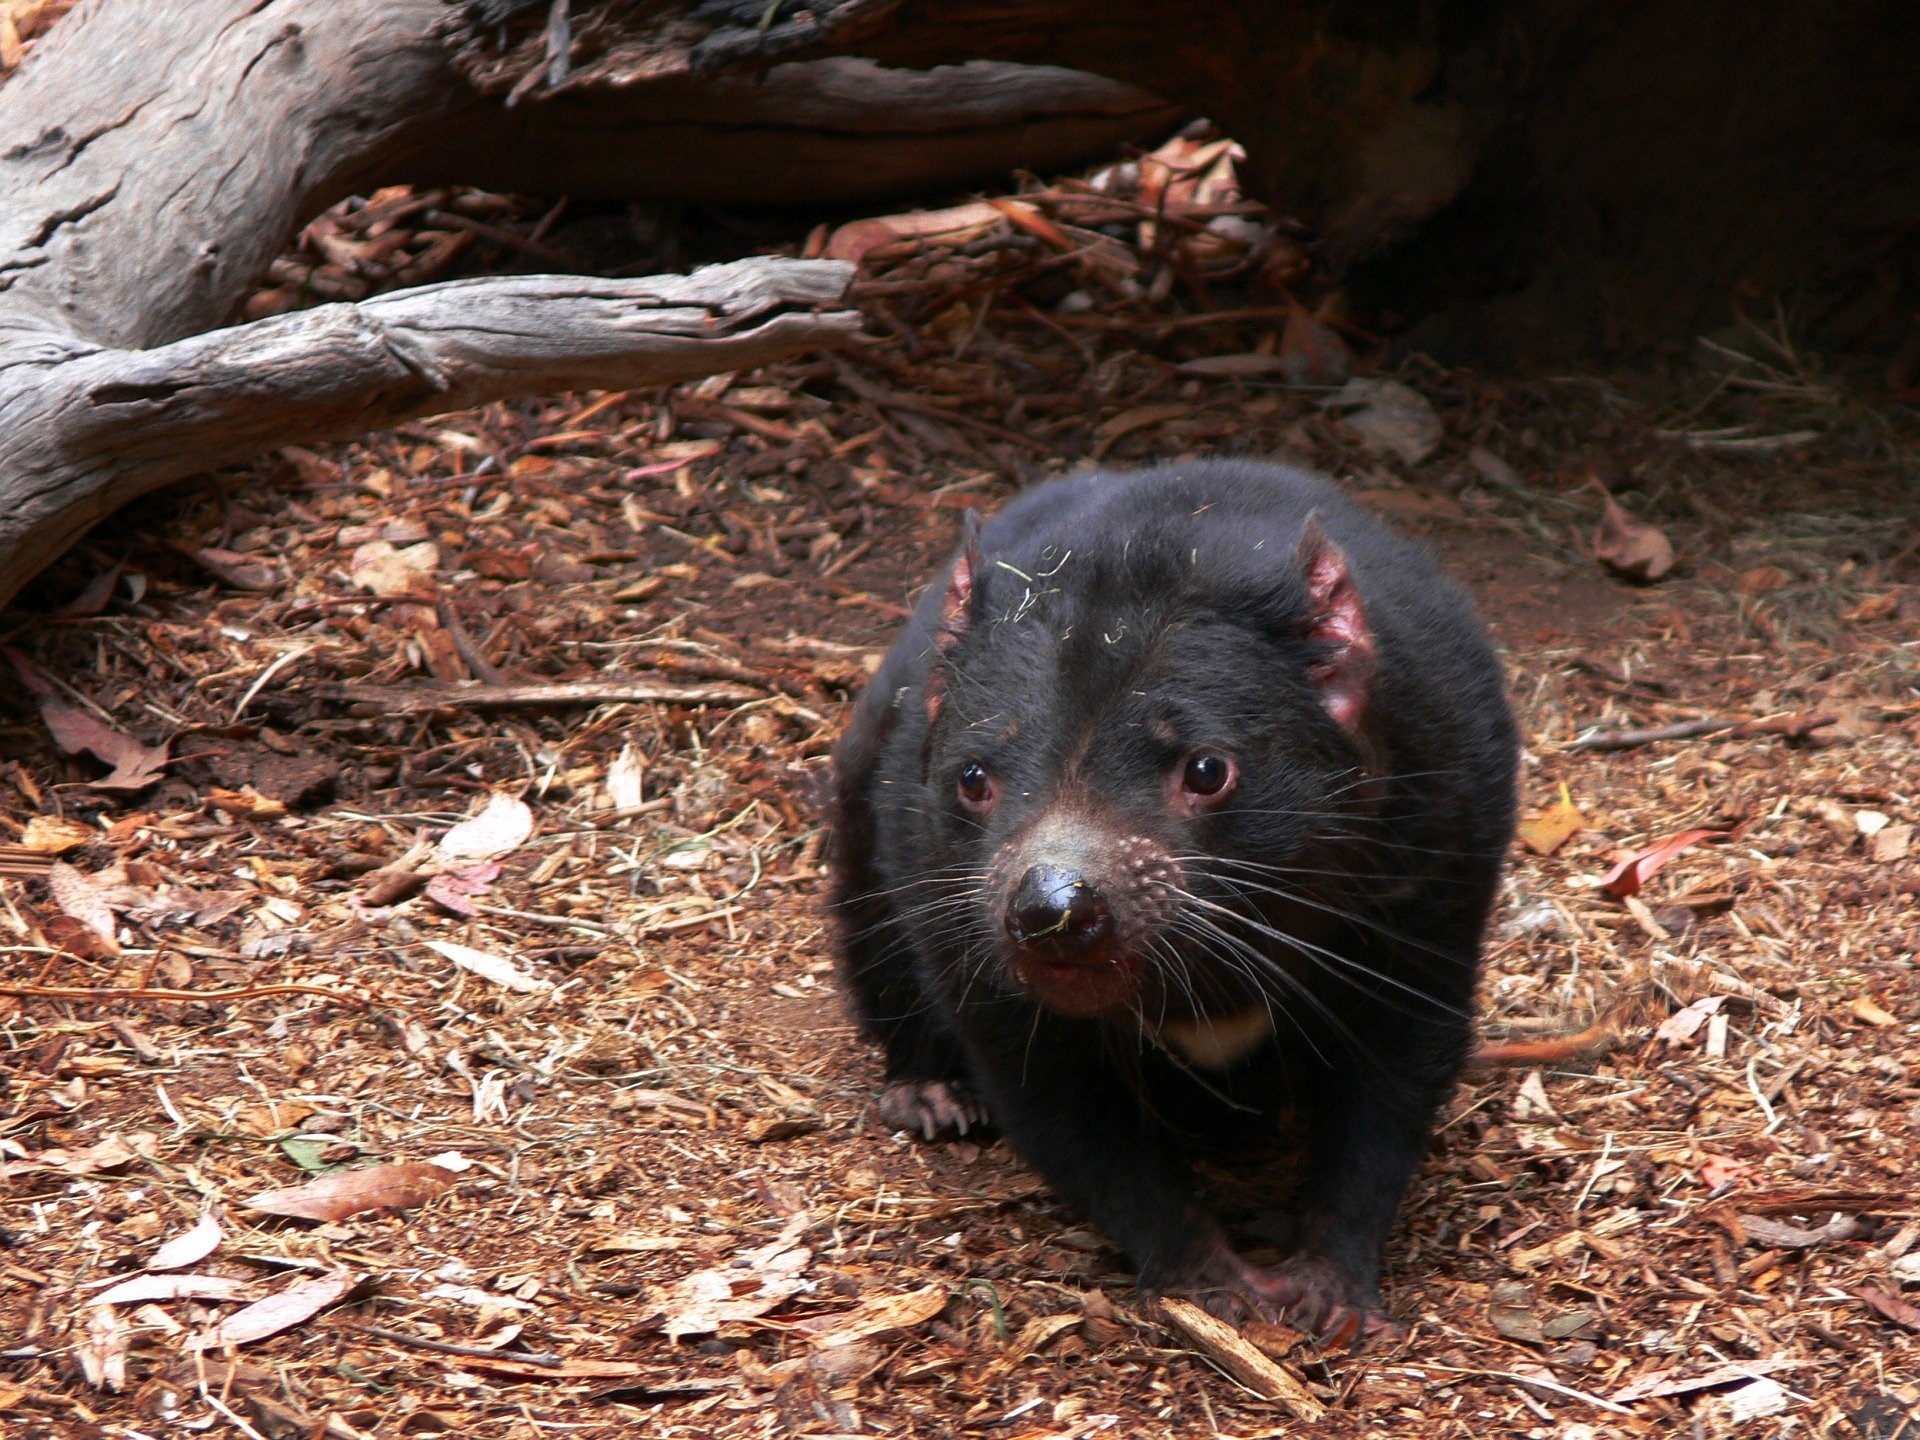 Tasmanian devils 'adapting to coexist with cancer' - BBC News